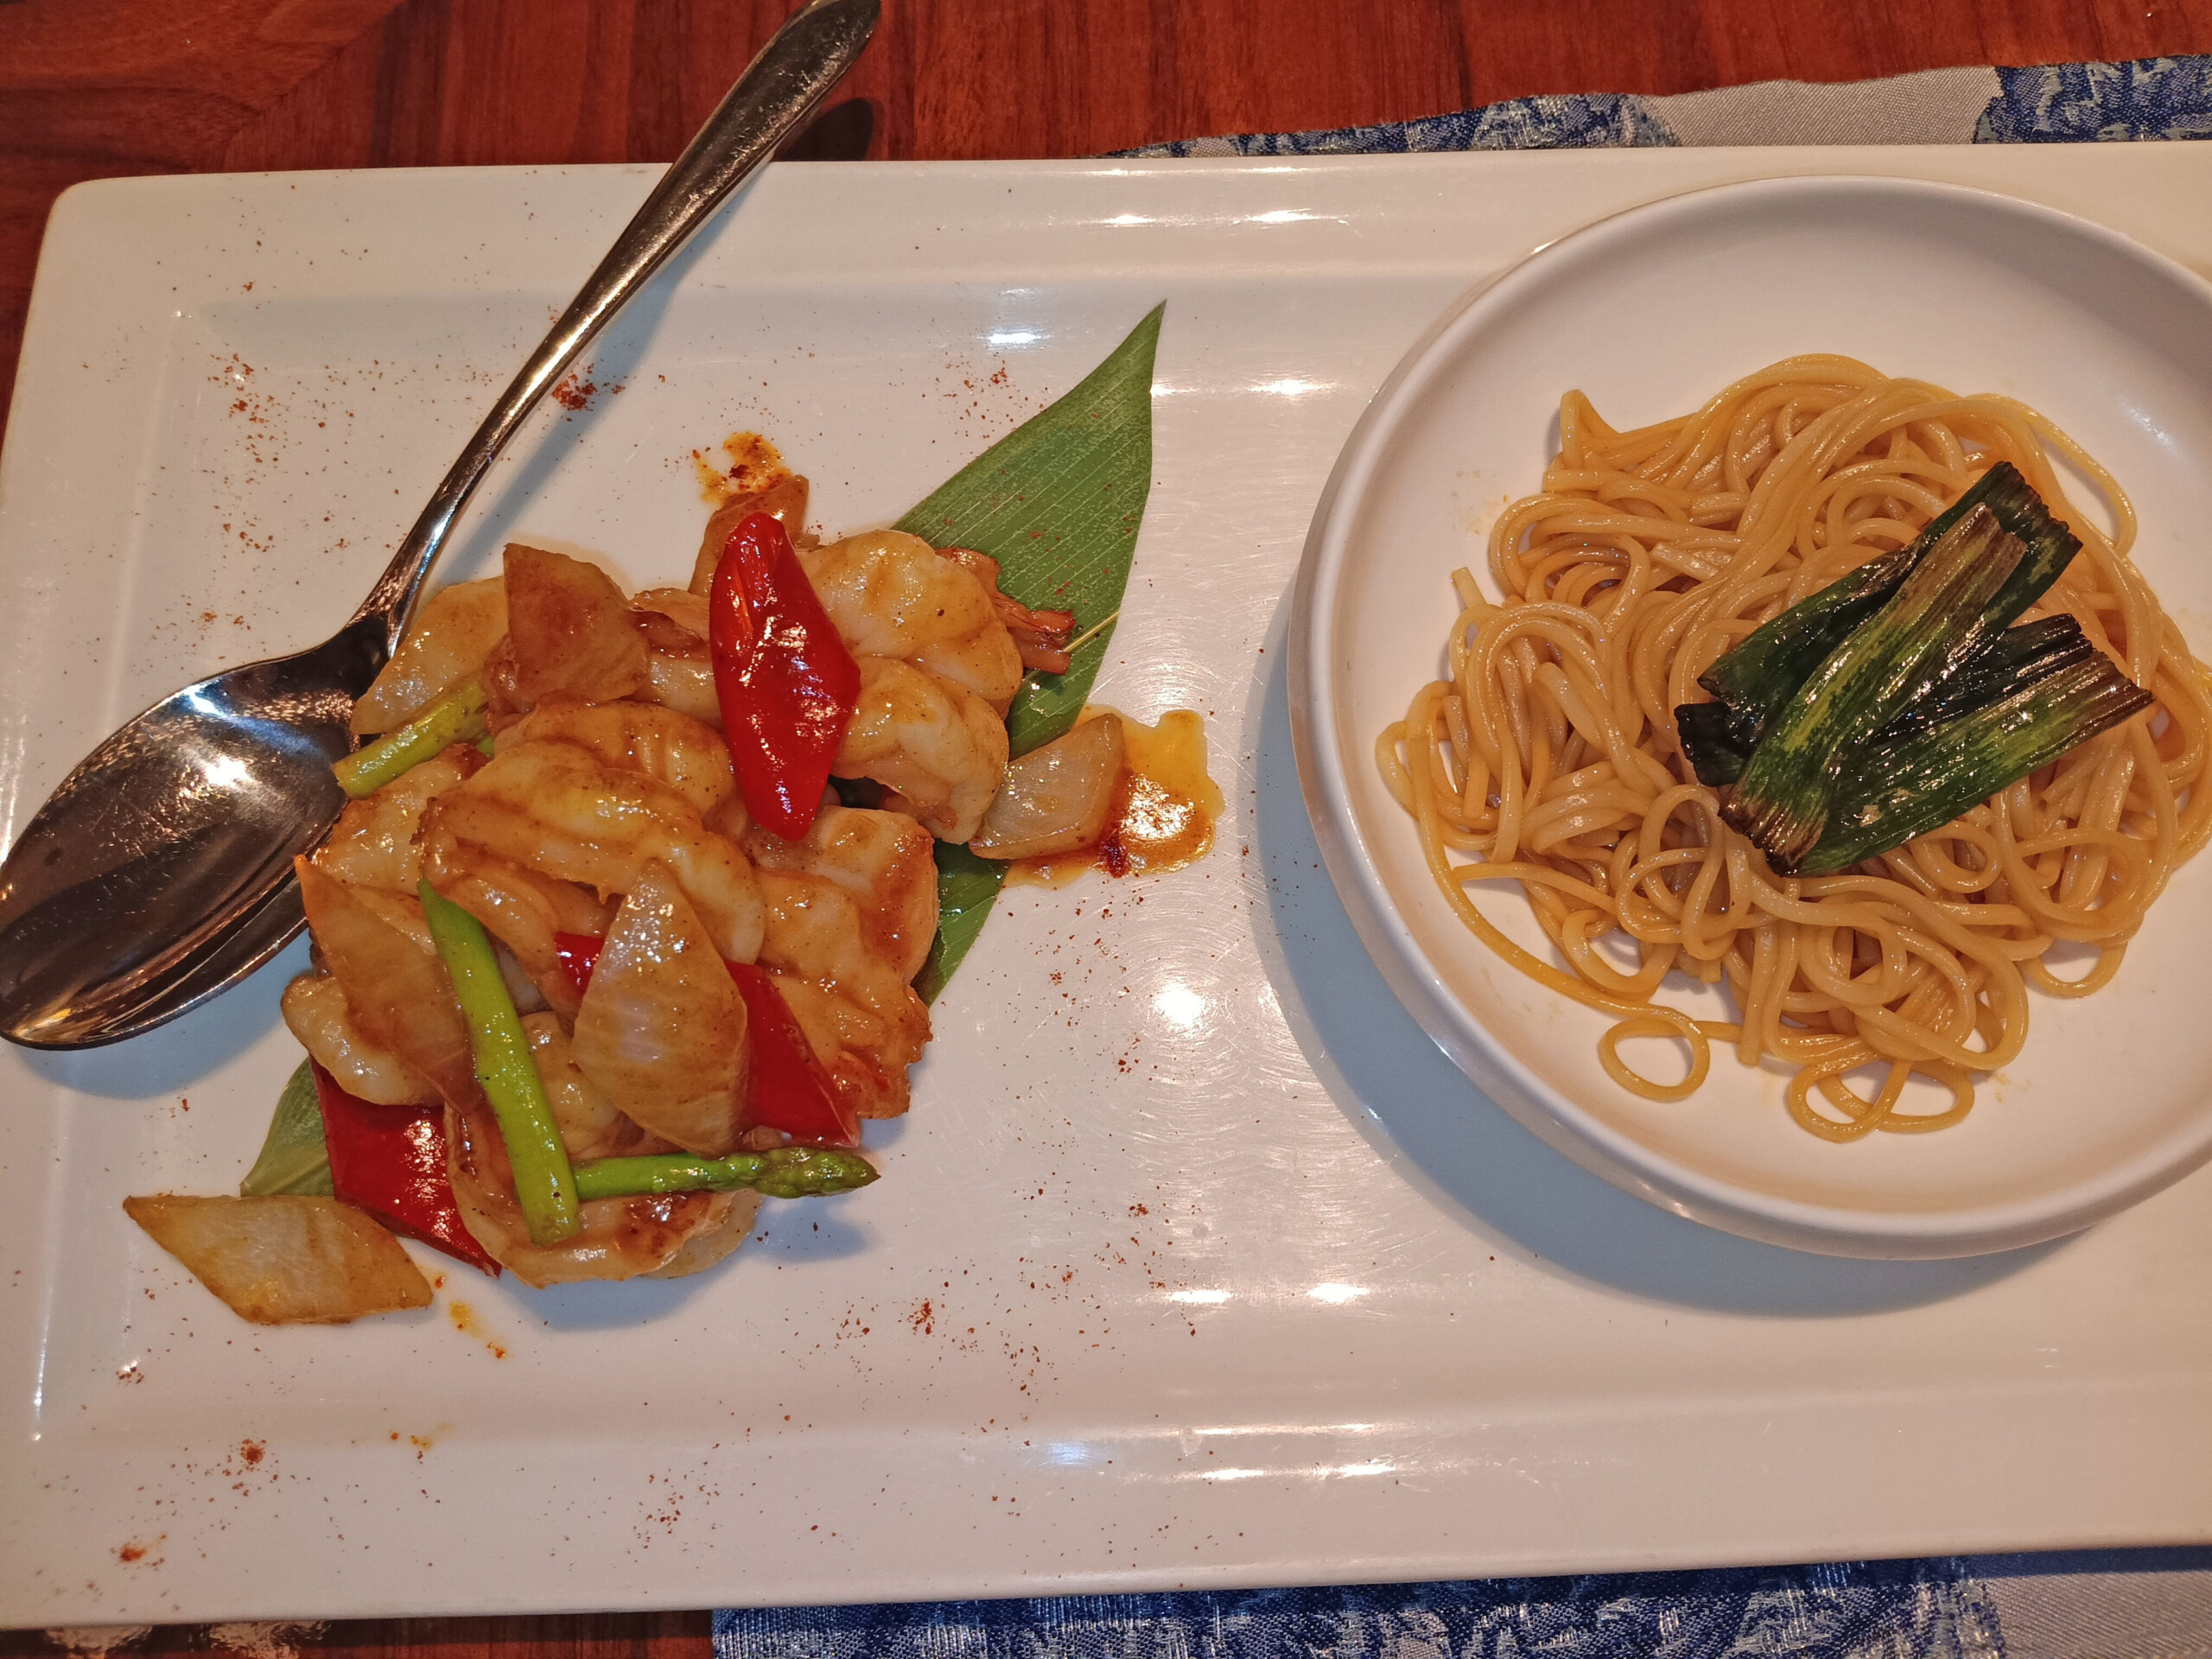 Shrimp and bell peppers with Shanghai scallion-oil noodles